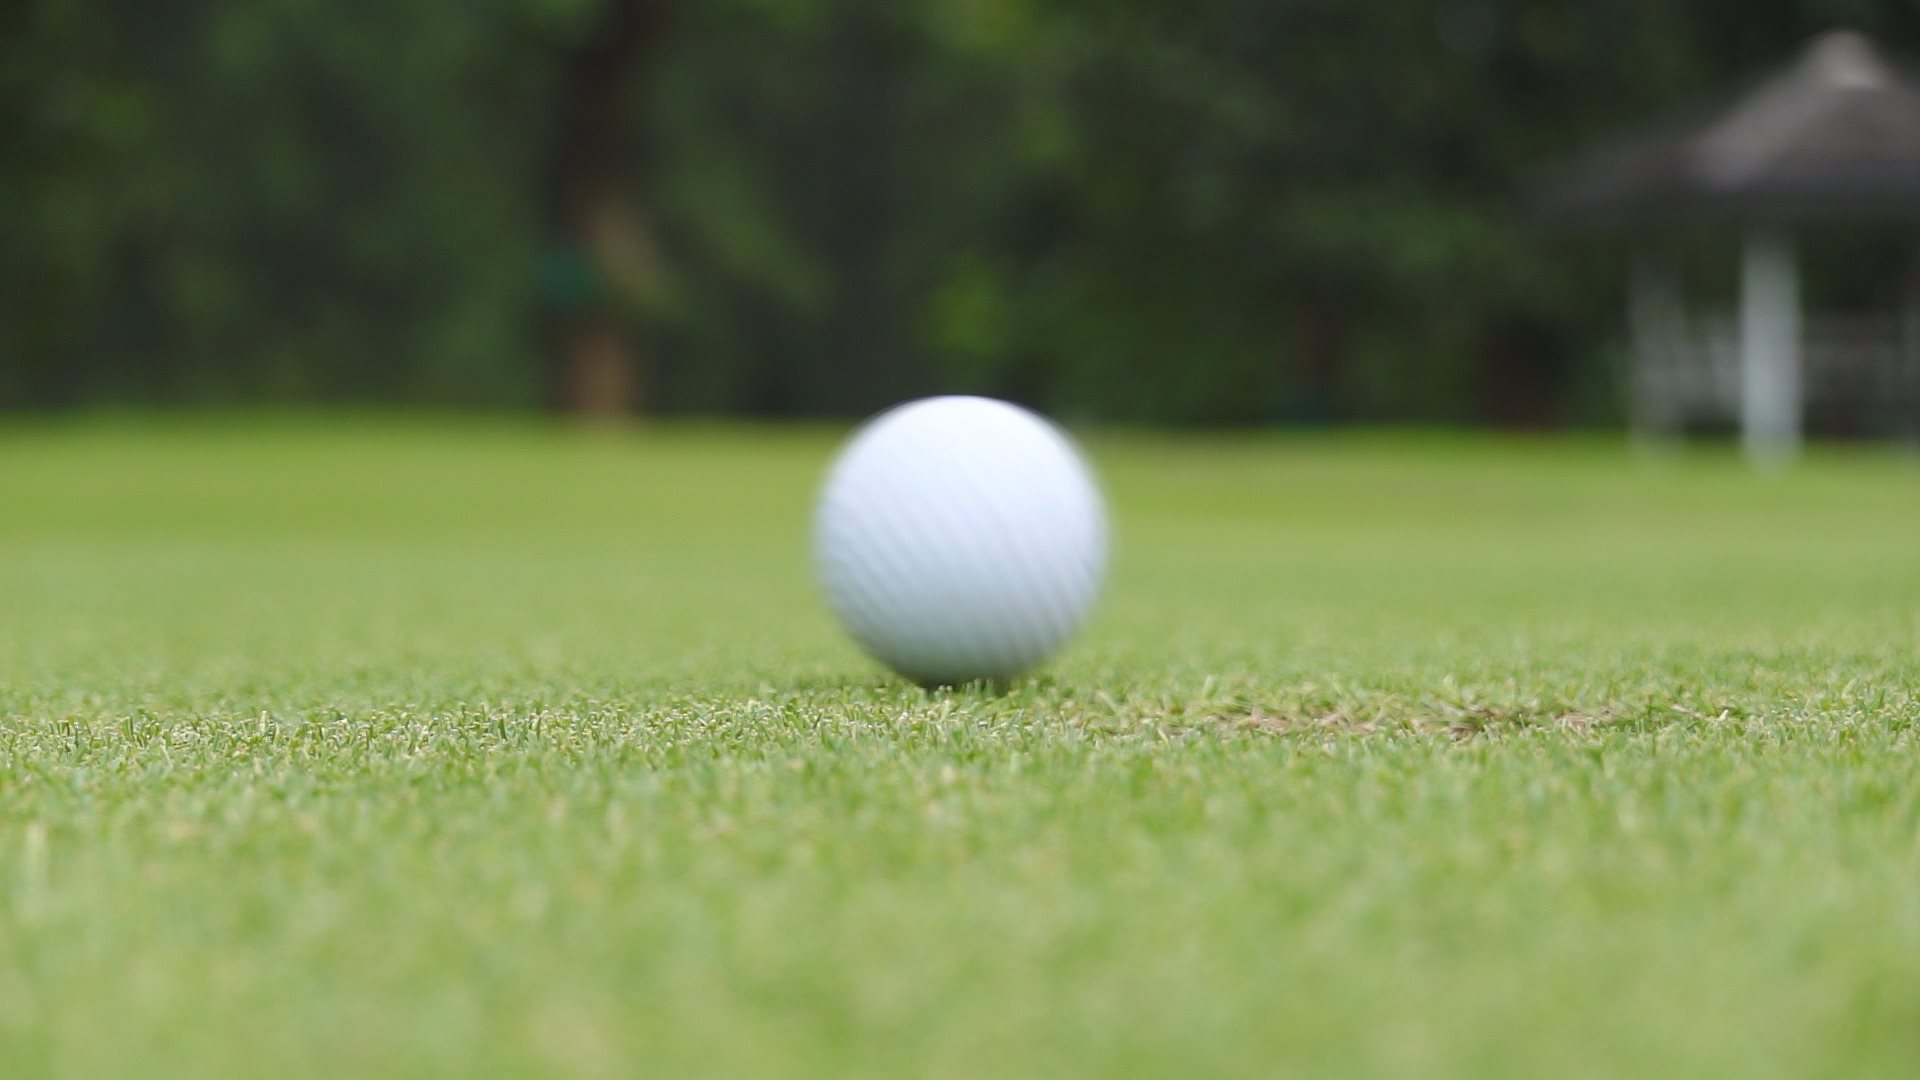 Video of a golf ball bouncing on the green and going in the hole